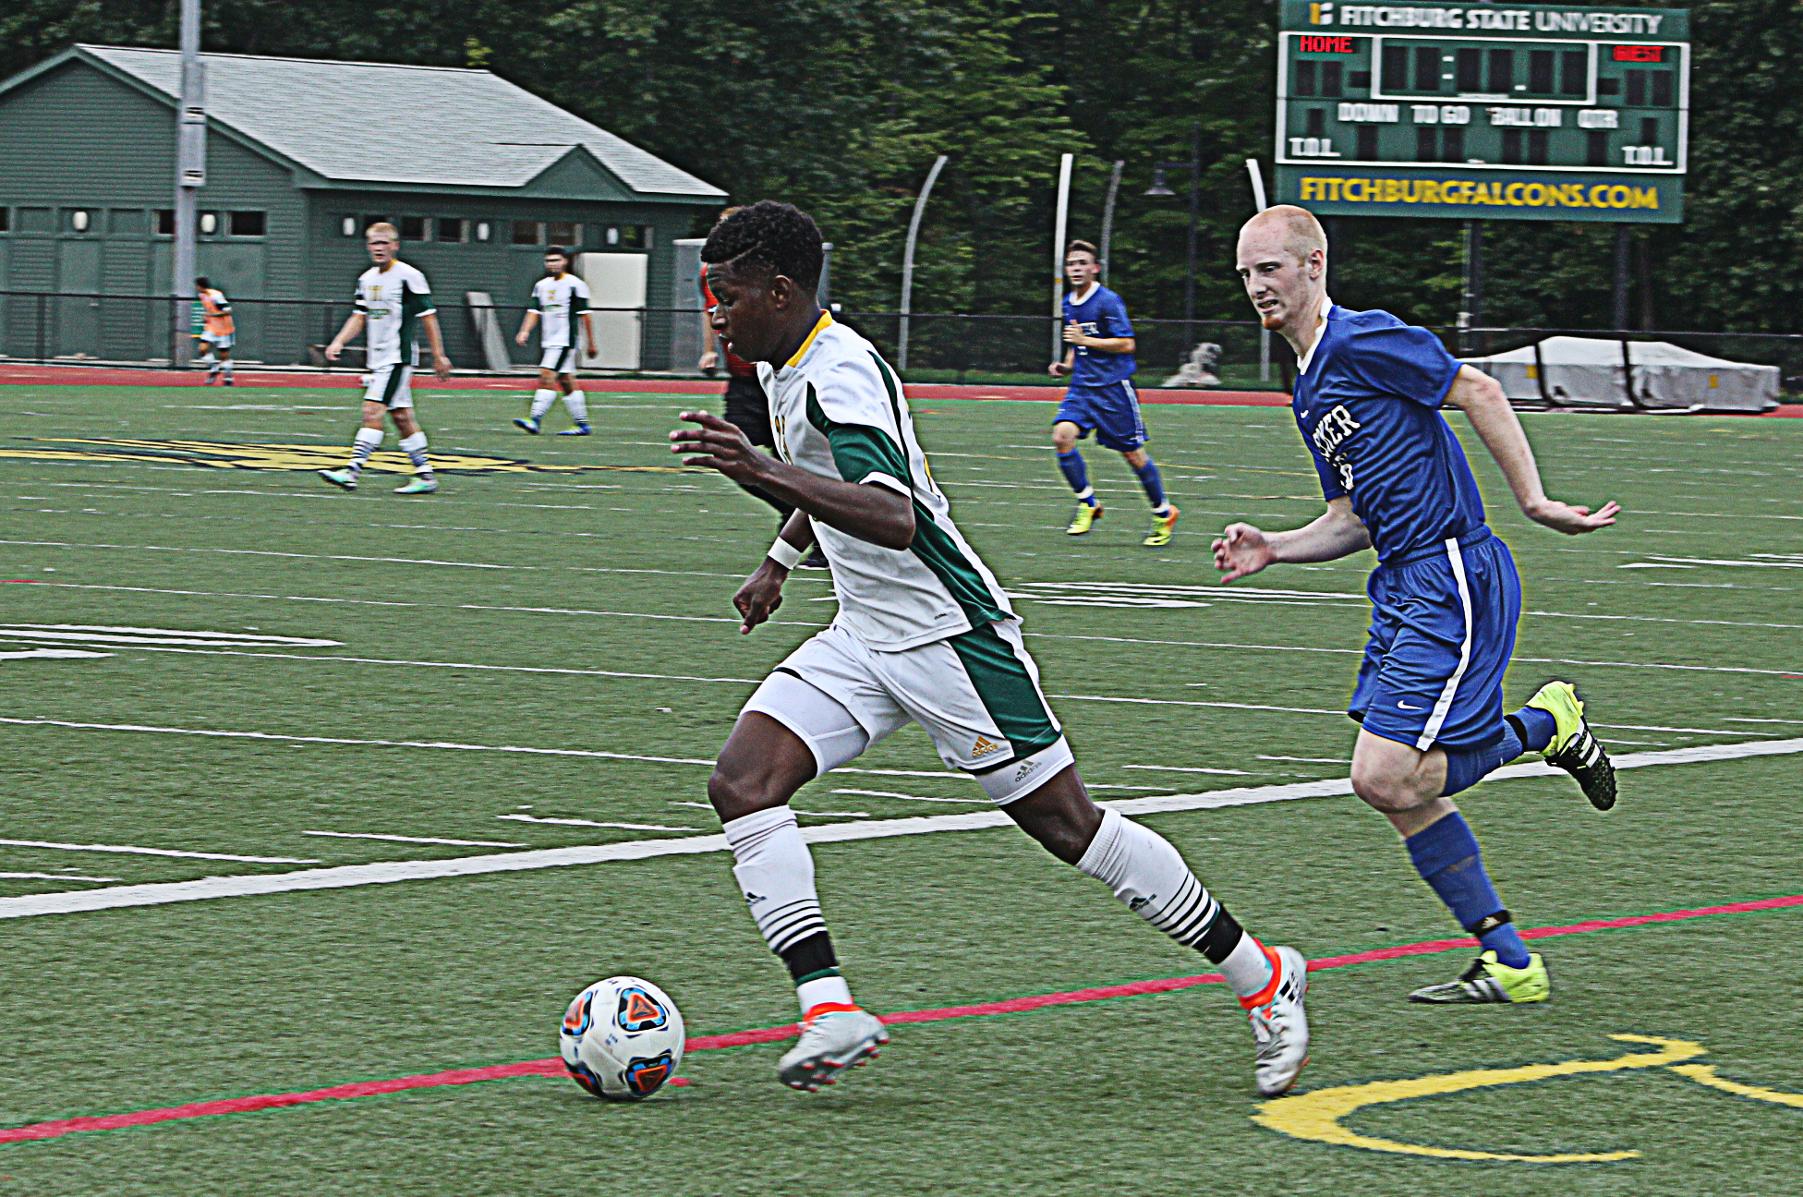 Fitchburg State Rebounds Over Elms, 3-1